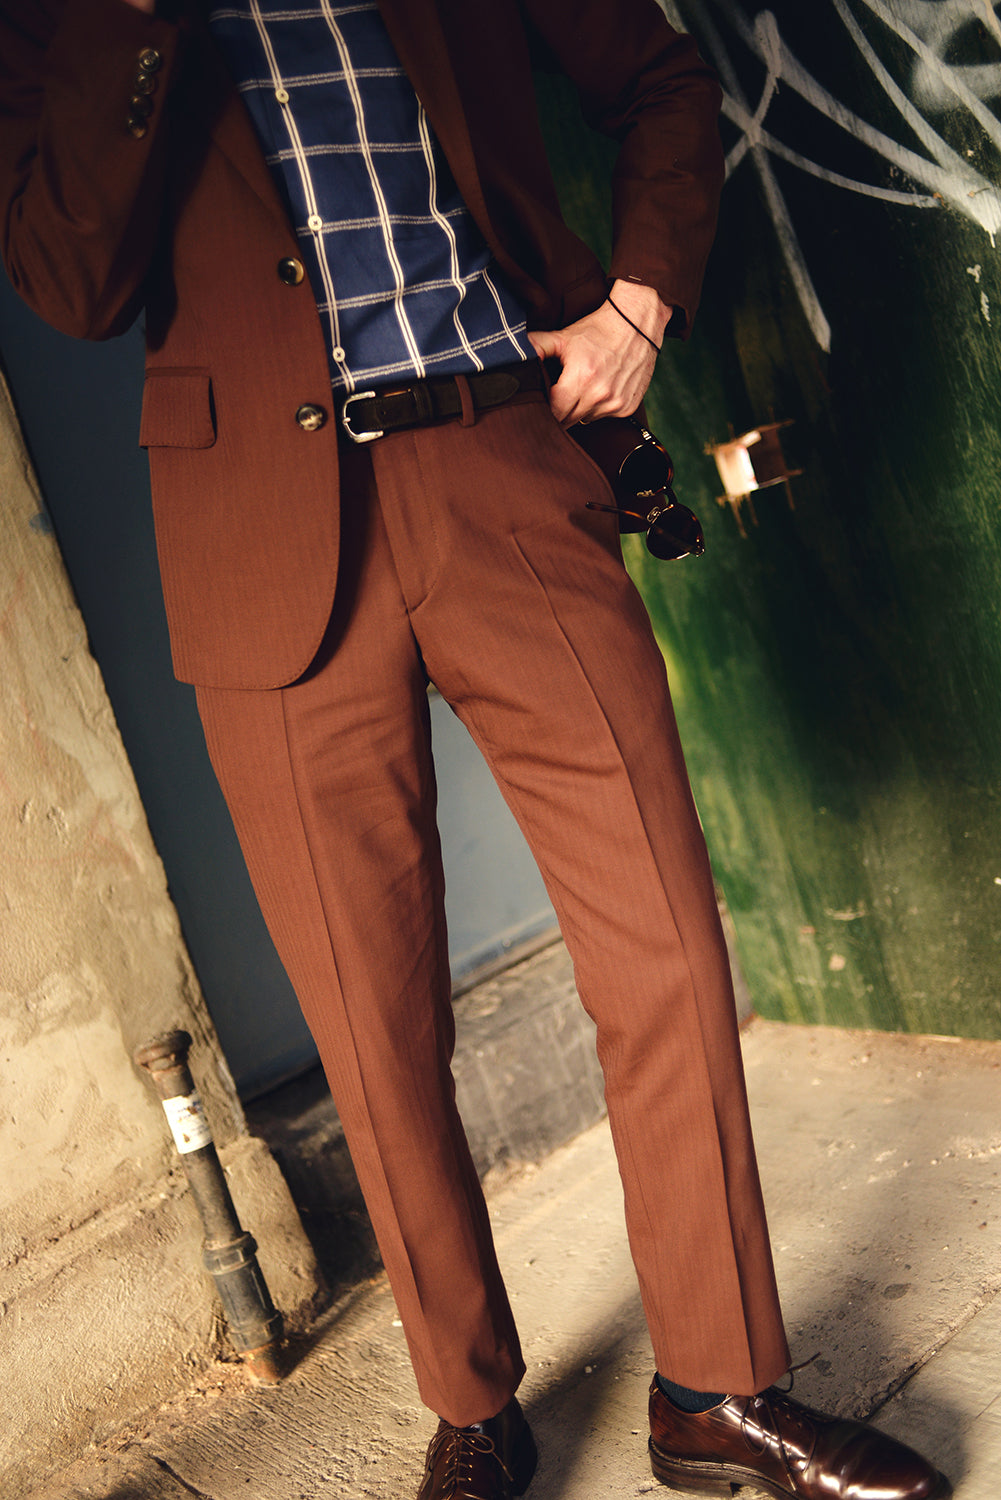 Brooklyn Tailors BKT18 Camp Shirt in Blue Windowpane on-body shot. Model is wearing a rust color suit, brown dress shoes, and brown belt with the shirt. He is holding sun glasses. 